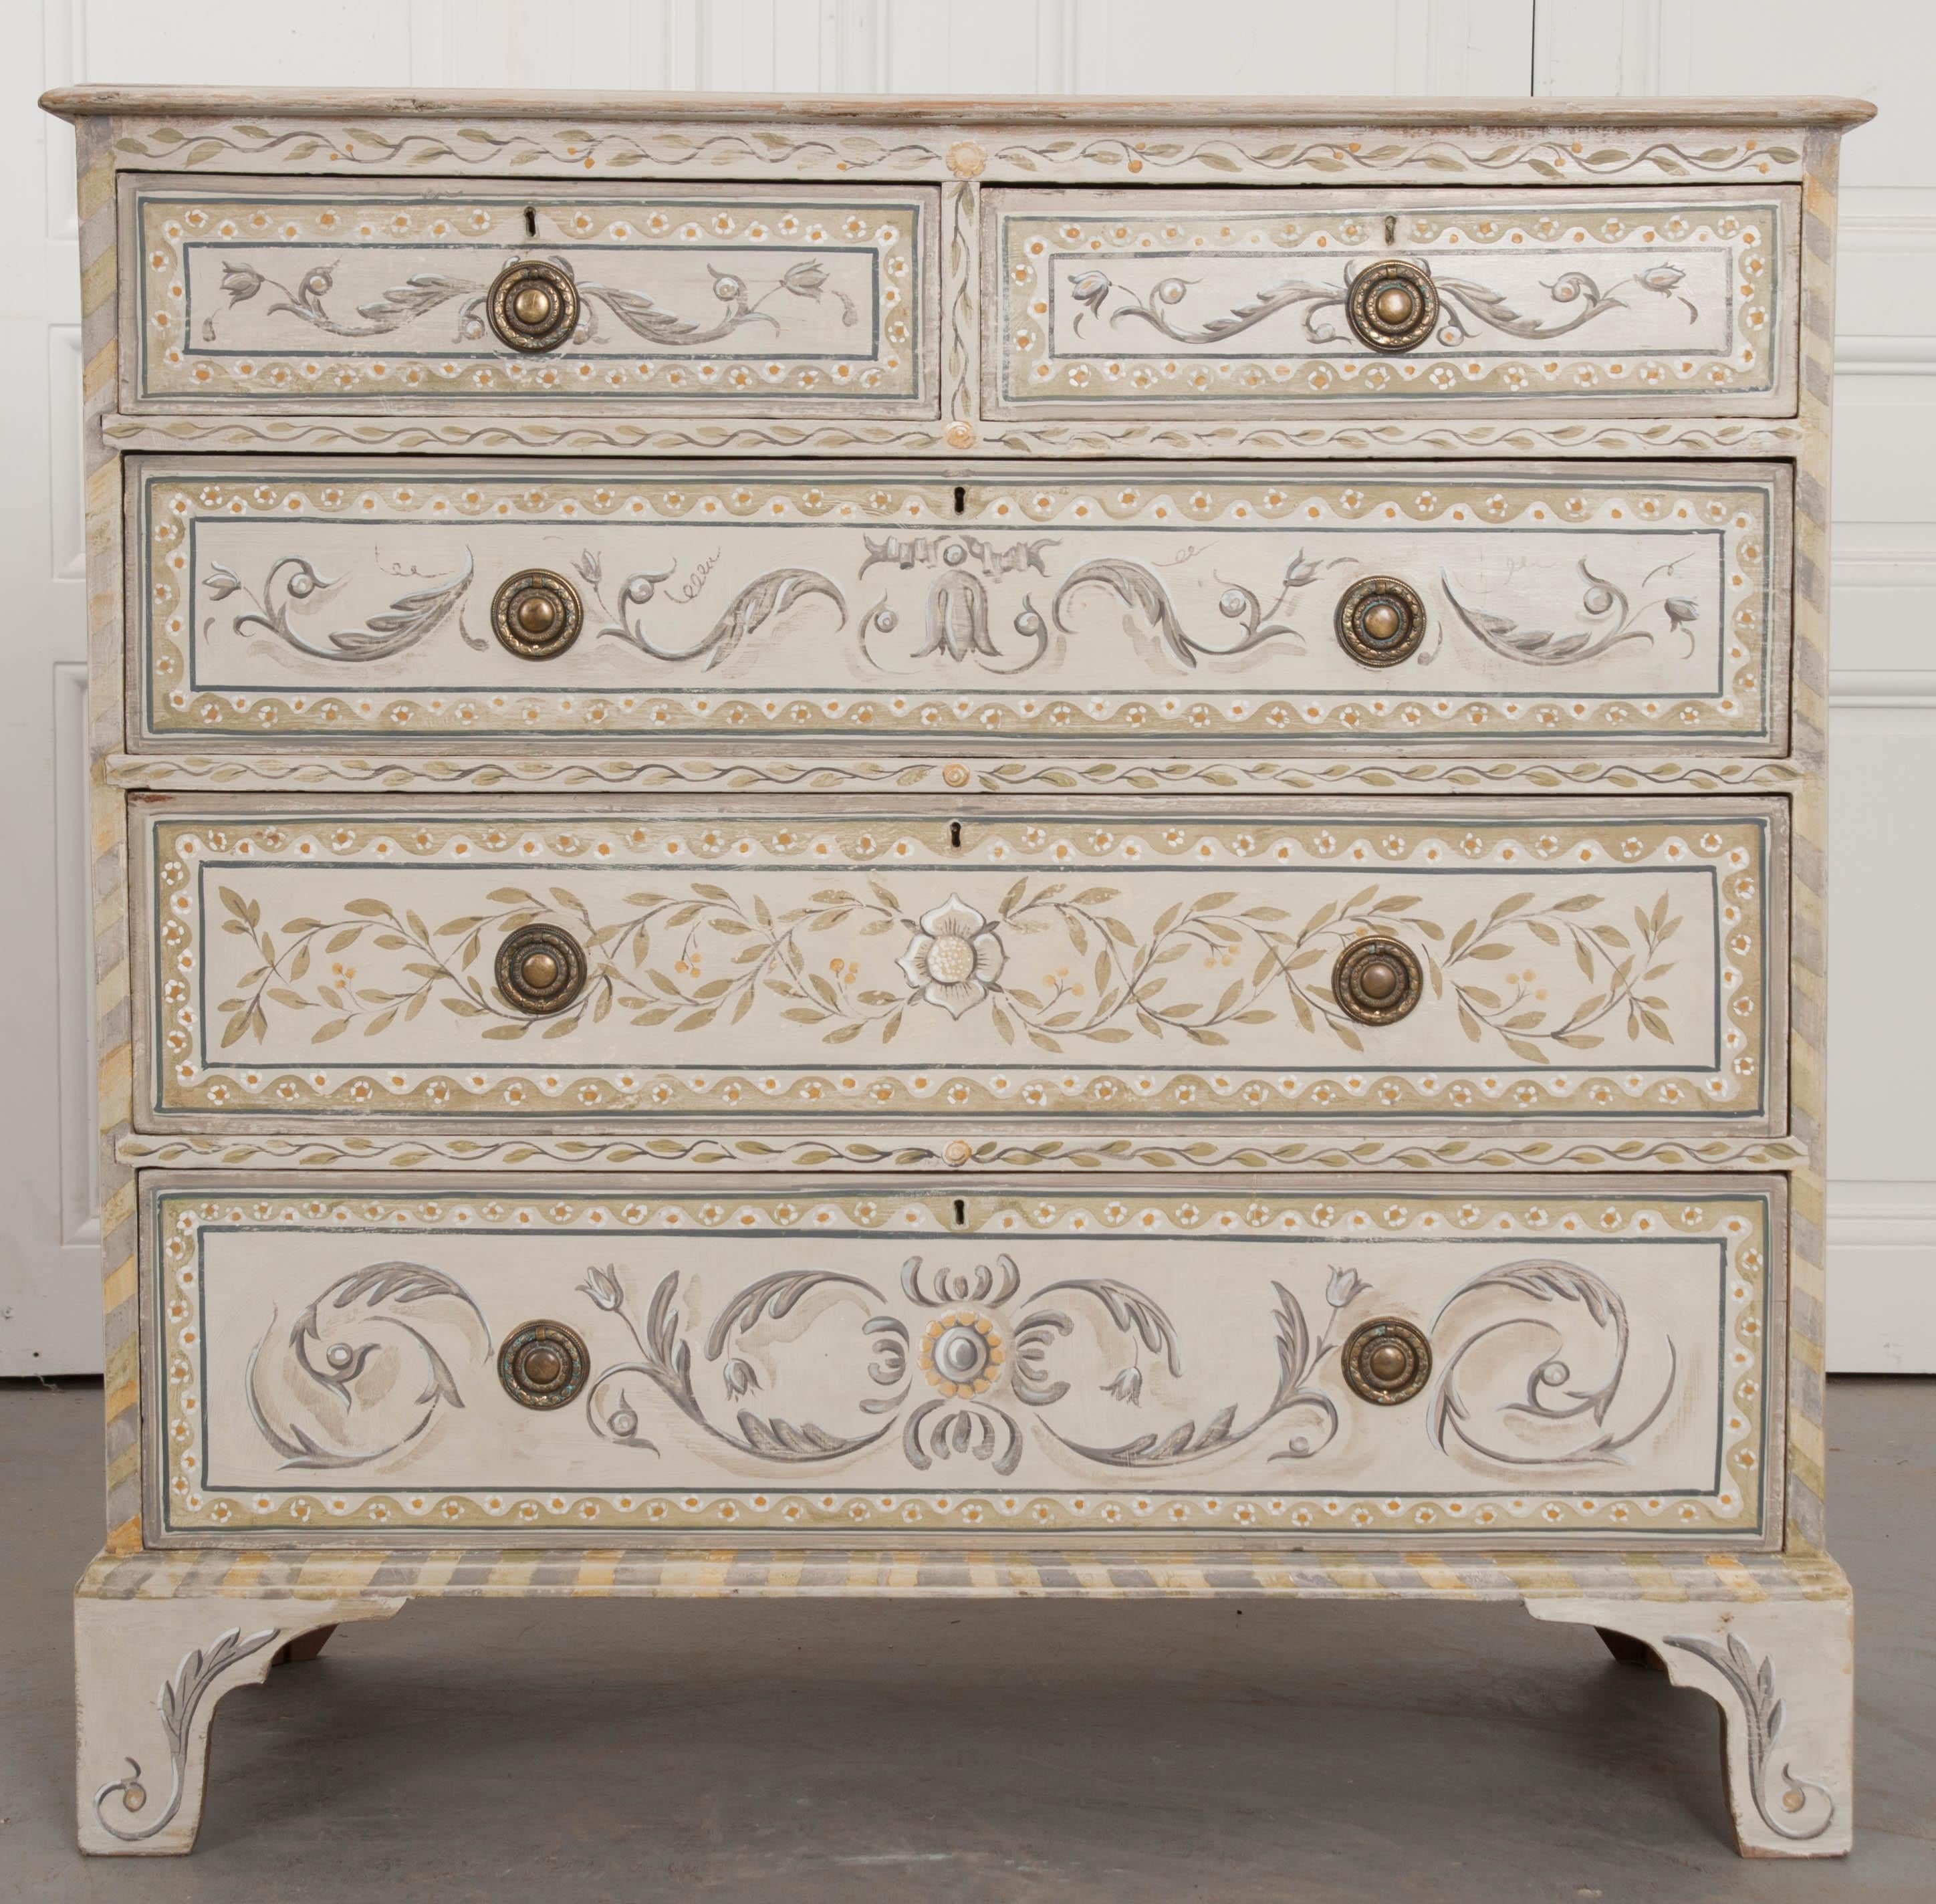 This masterfully painted chest of drawers was made in England, towards the turn of the 20th century. The five-drawer chest has a Classic, Georgian silhouette and has been painted with great attention paid to detail. Scrolled acanthus and leafy